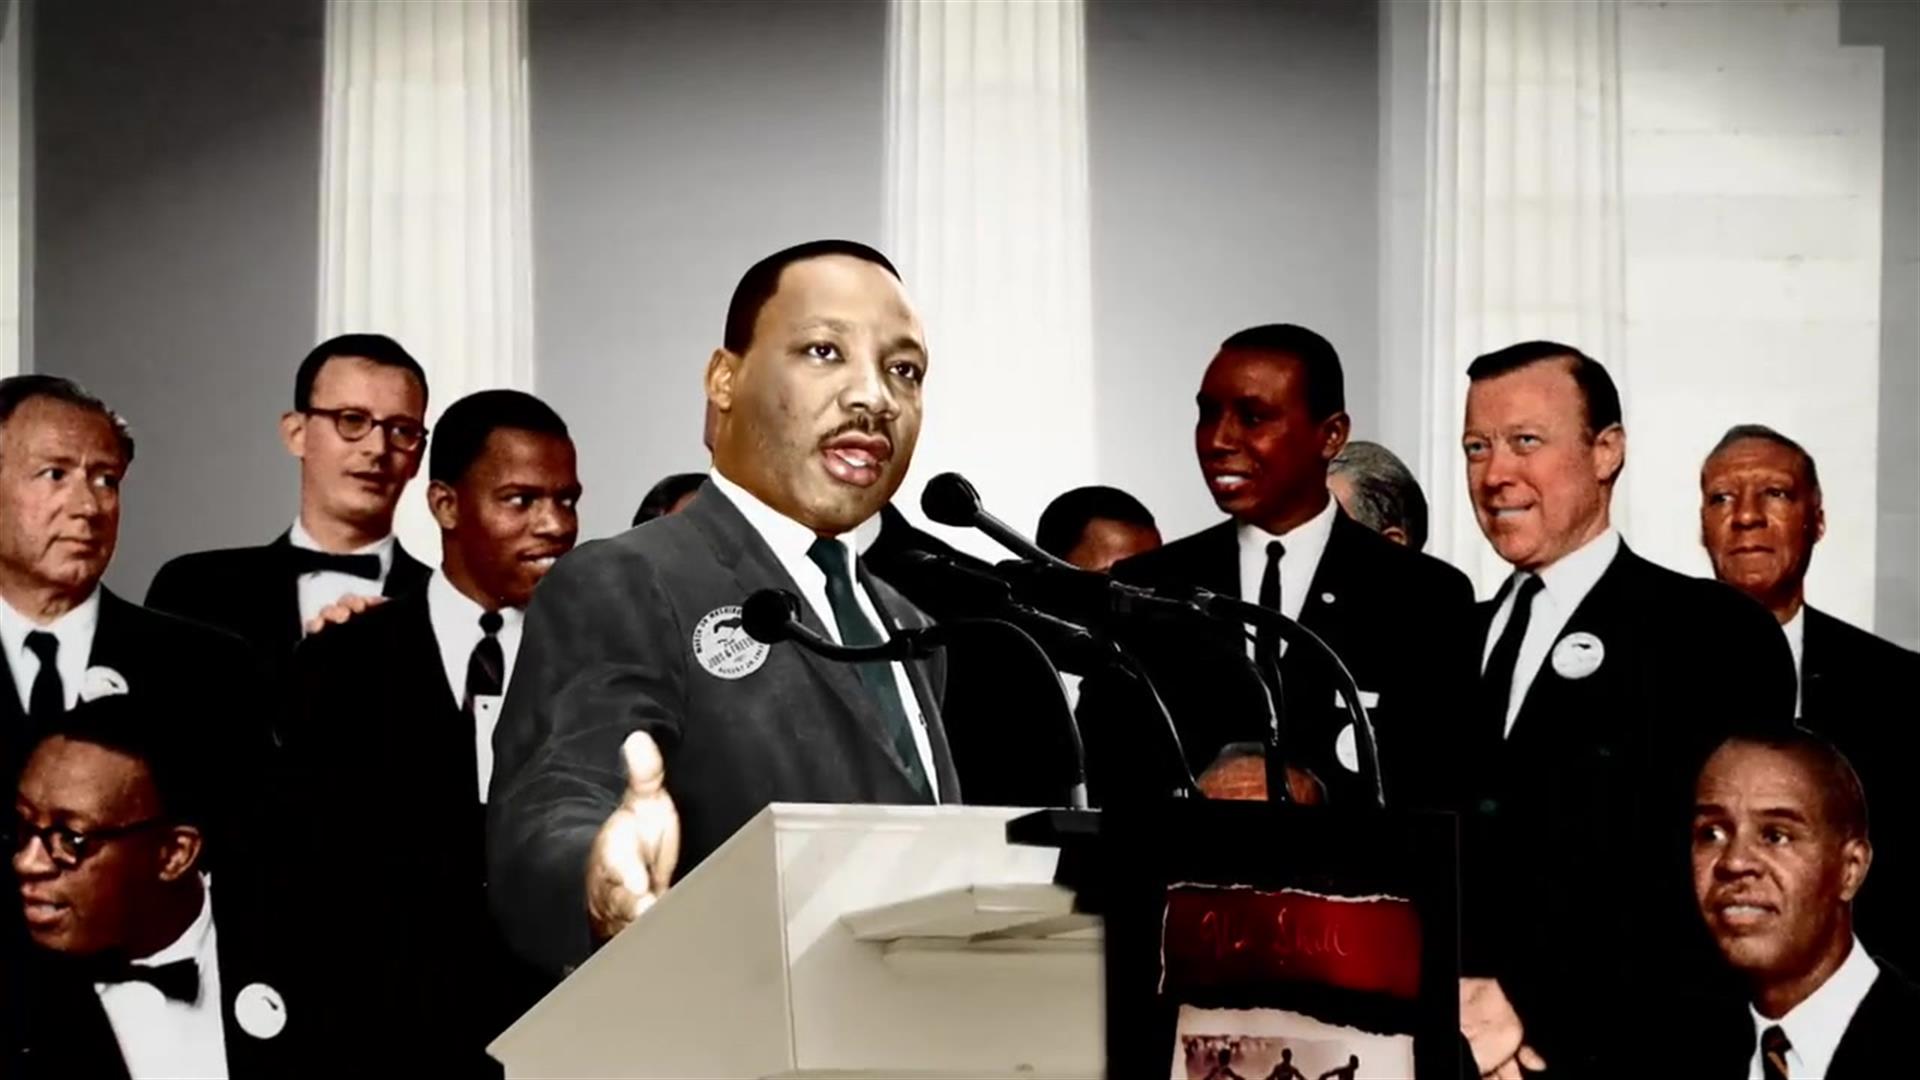 I Have a Dream speech by Martin Luther King .Jr HD (subtitled